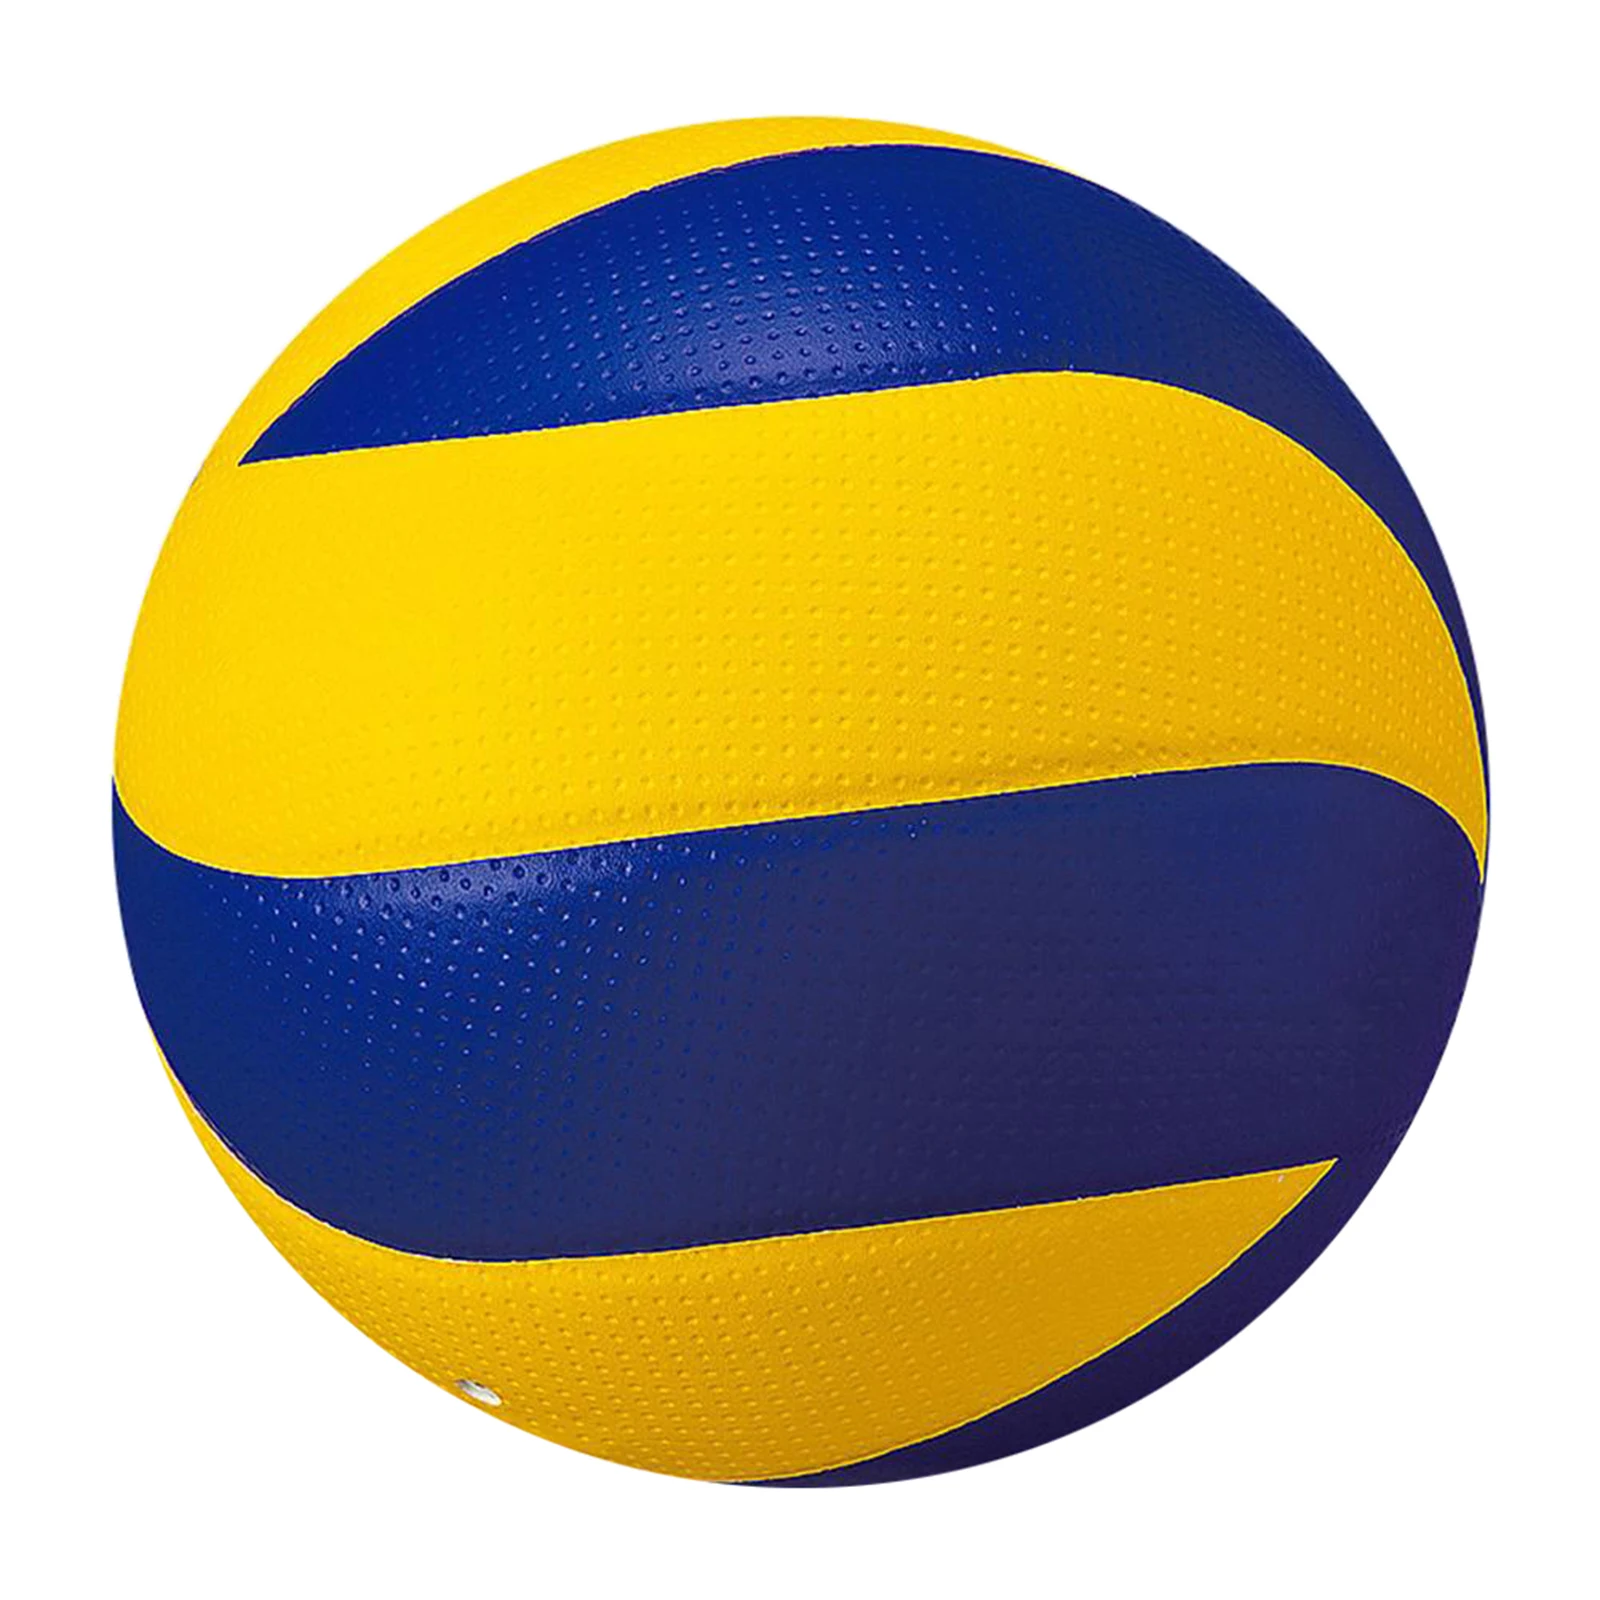 Professional Standard Size 5 Beach Volleyball Ball for Kids Adults Gym